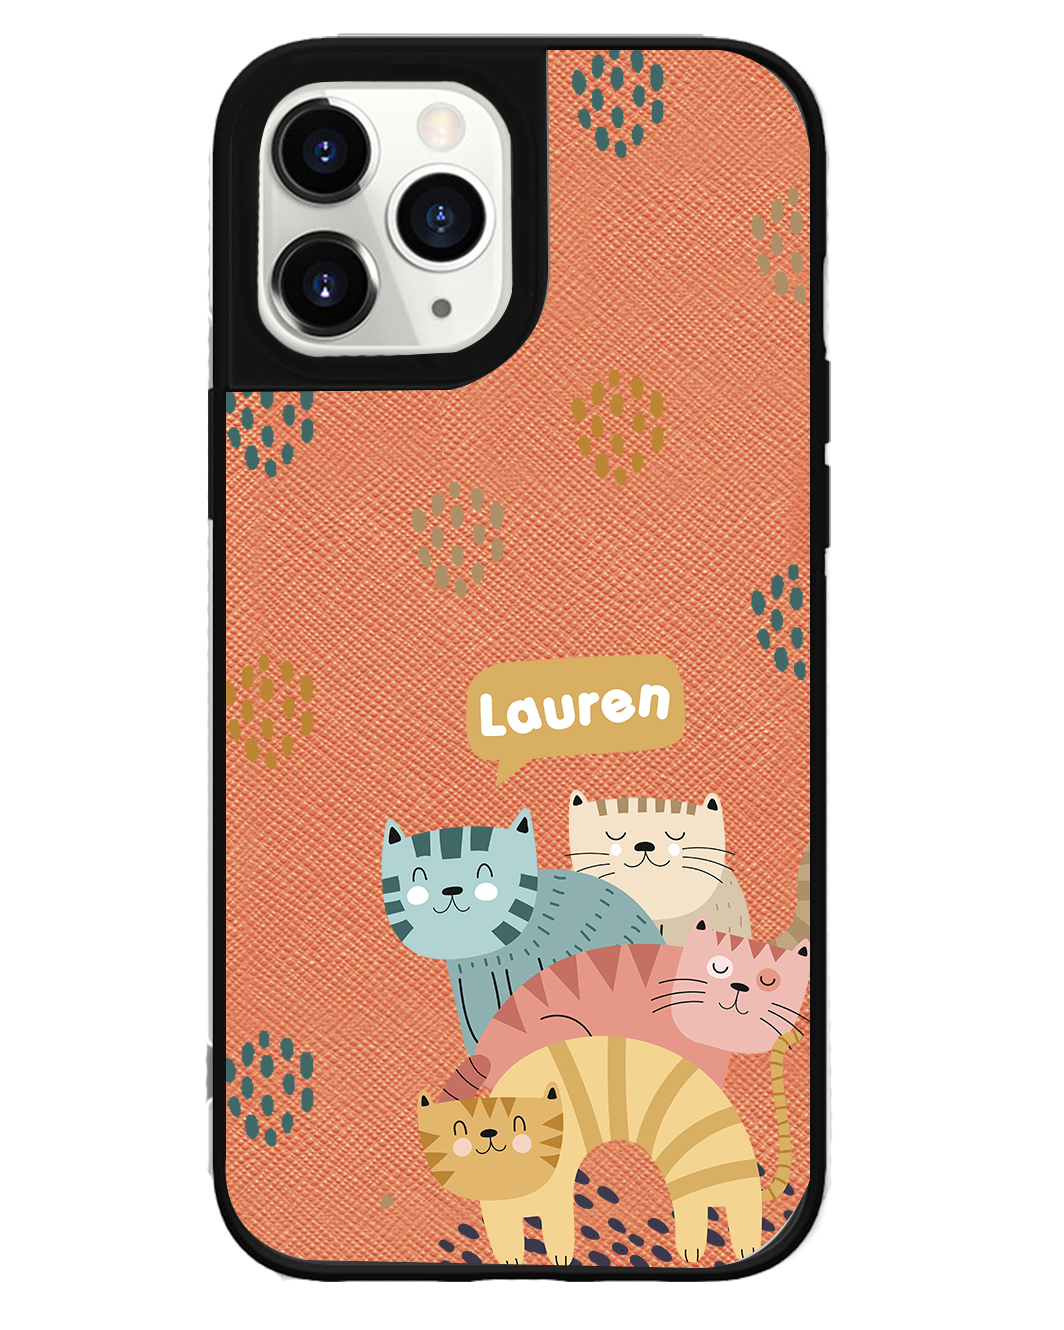 iPhone Leather Grip Case - Rainbow Meow 2.0